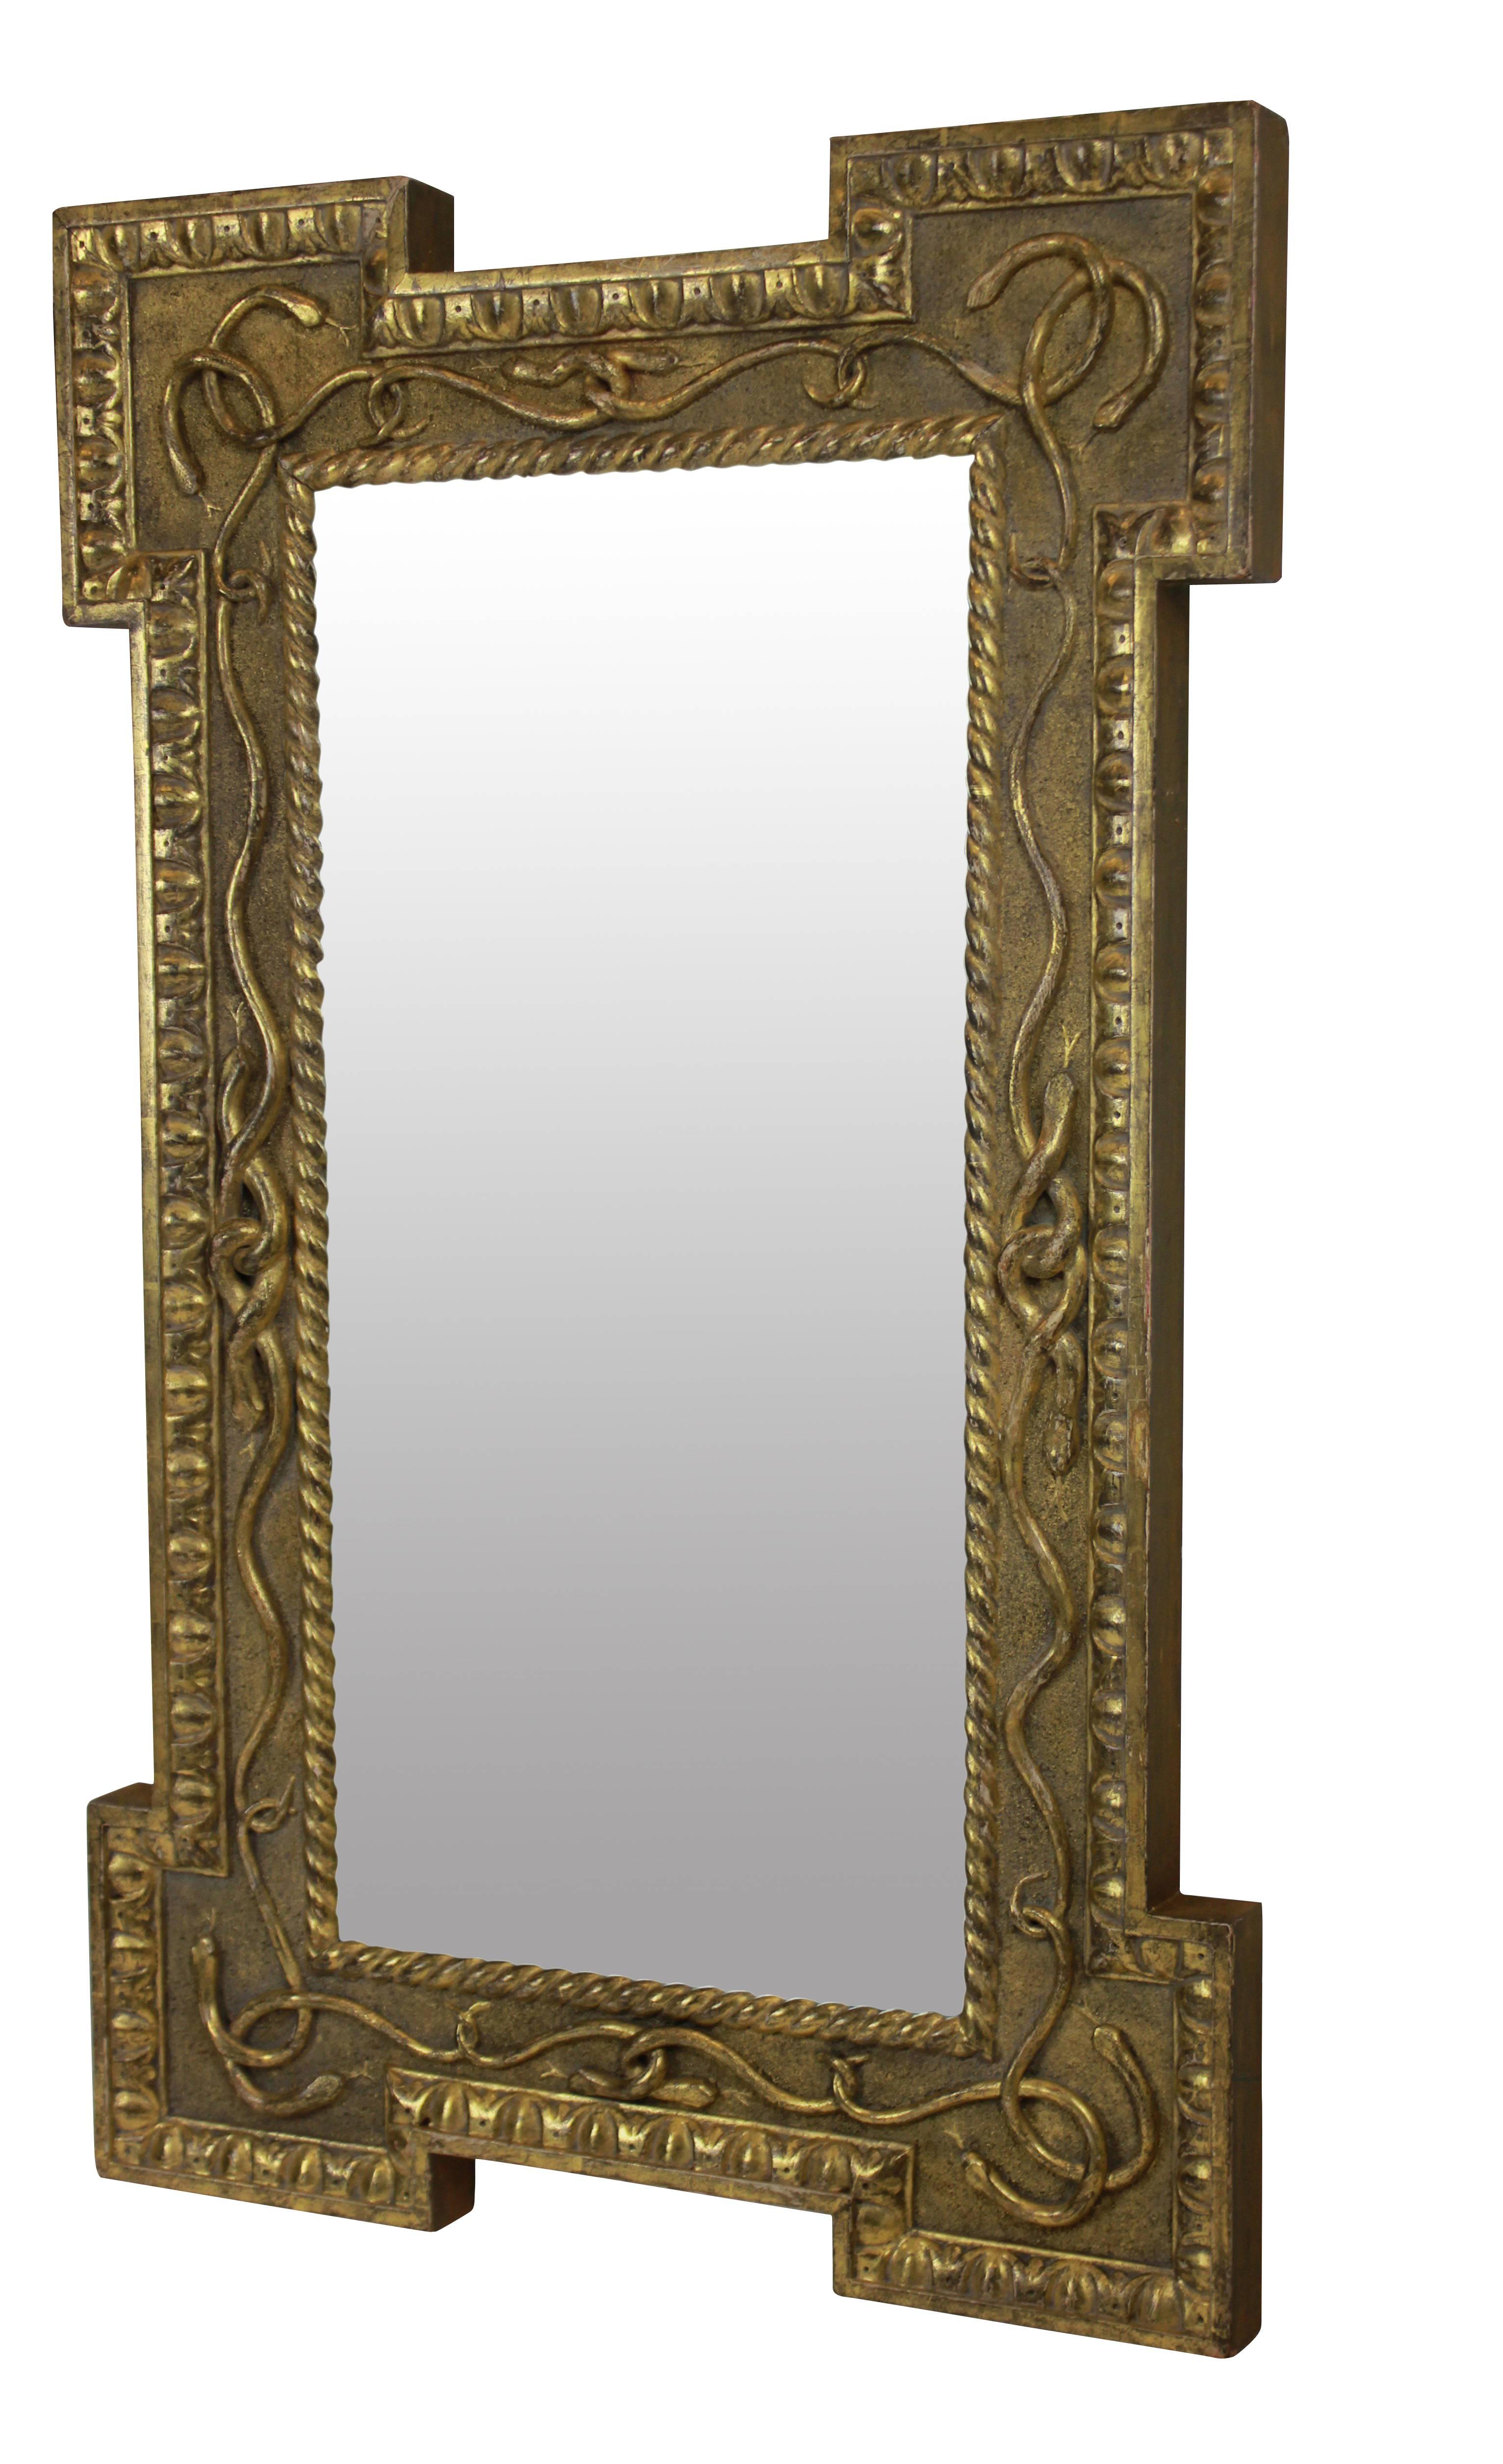 An unusual English Regency mirror in water gilding, depicting entwined serpents. With egg and dart molding, stepped frame and sand coated background.
  